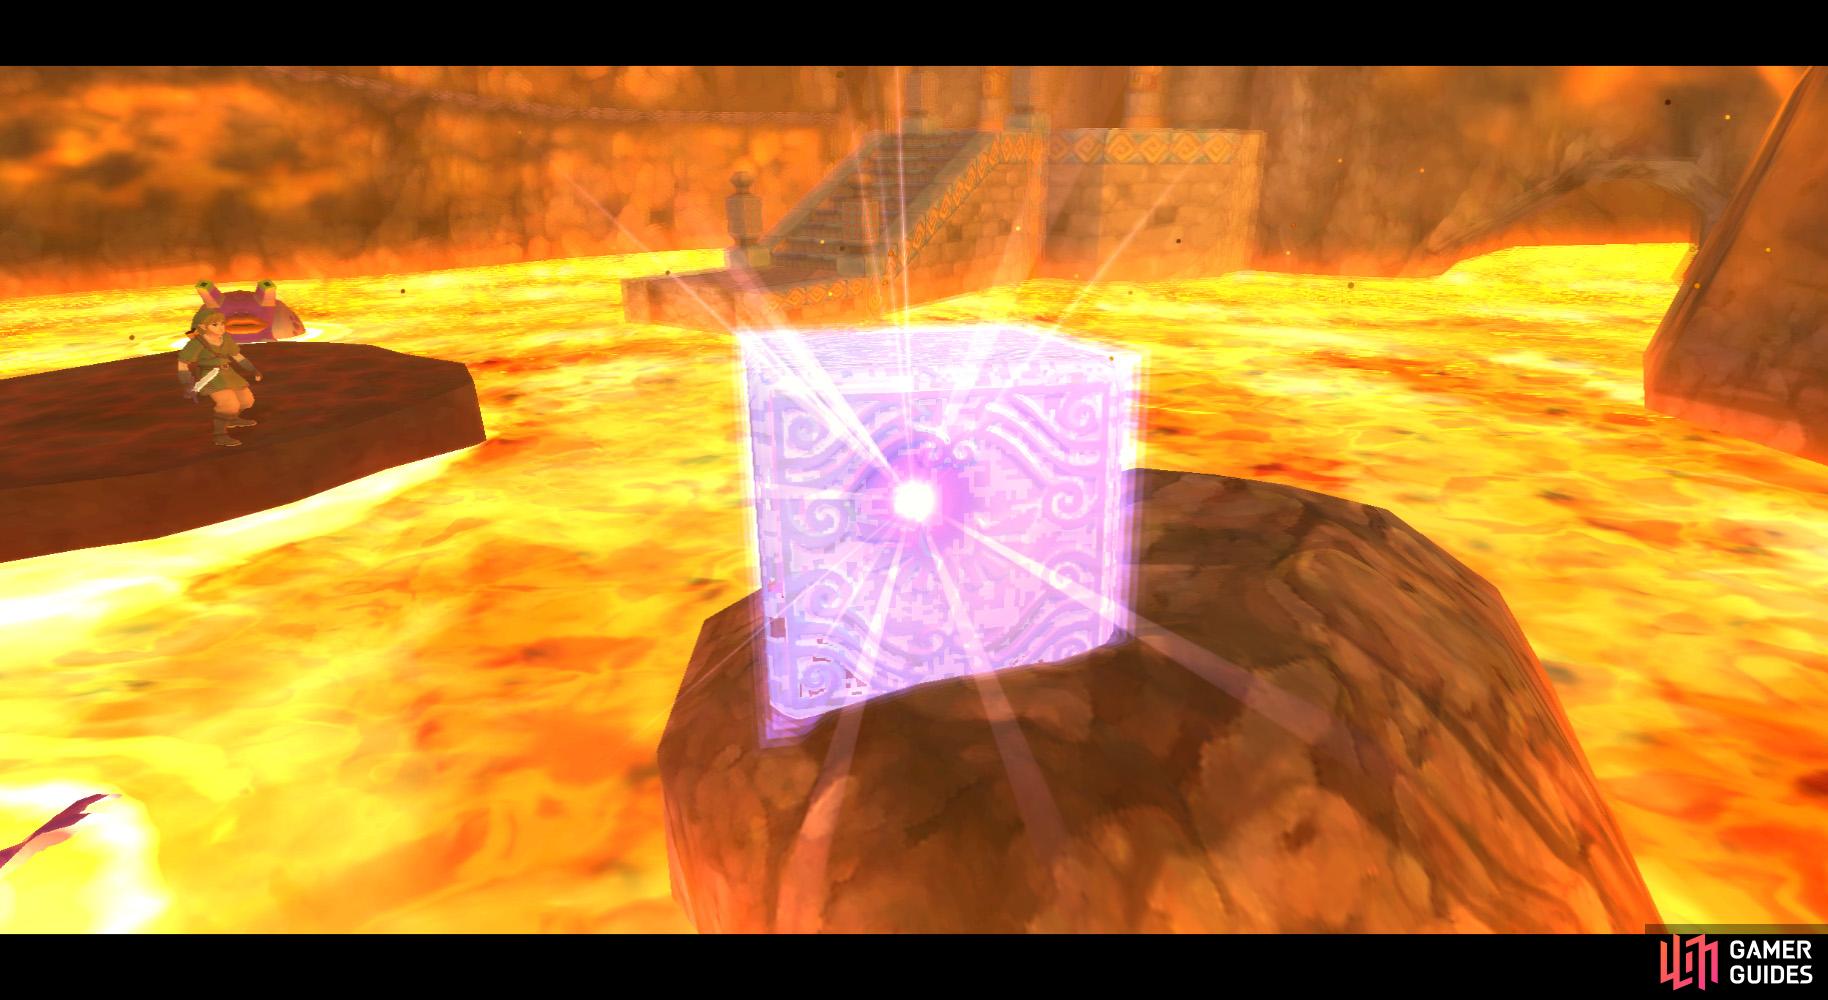 Then aim it at the Goddess Cube as you travel near it.